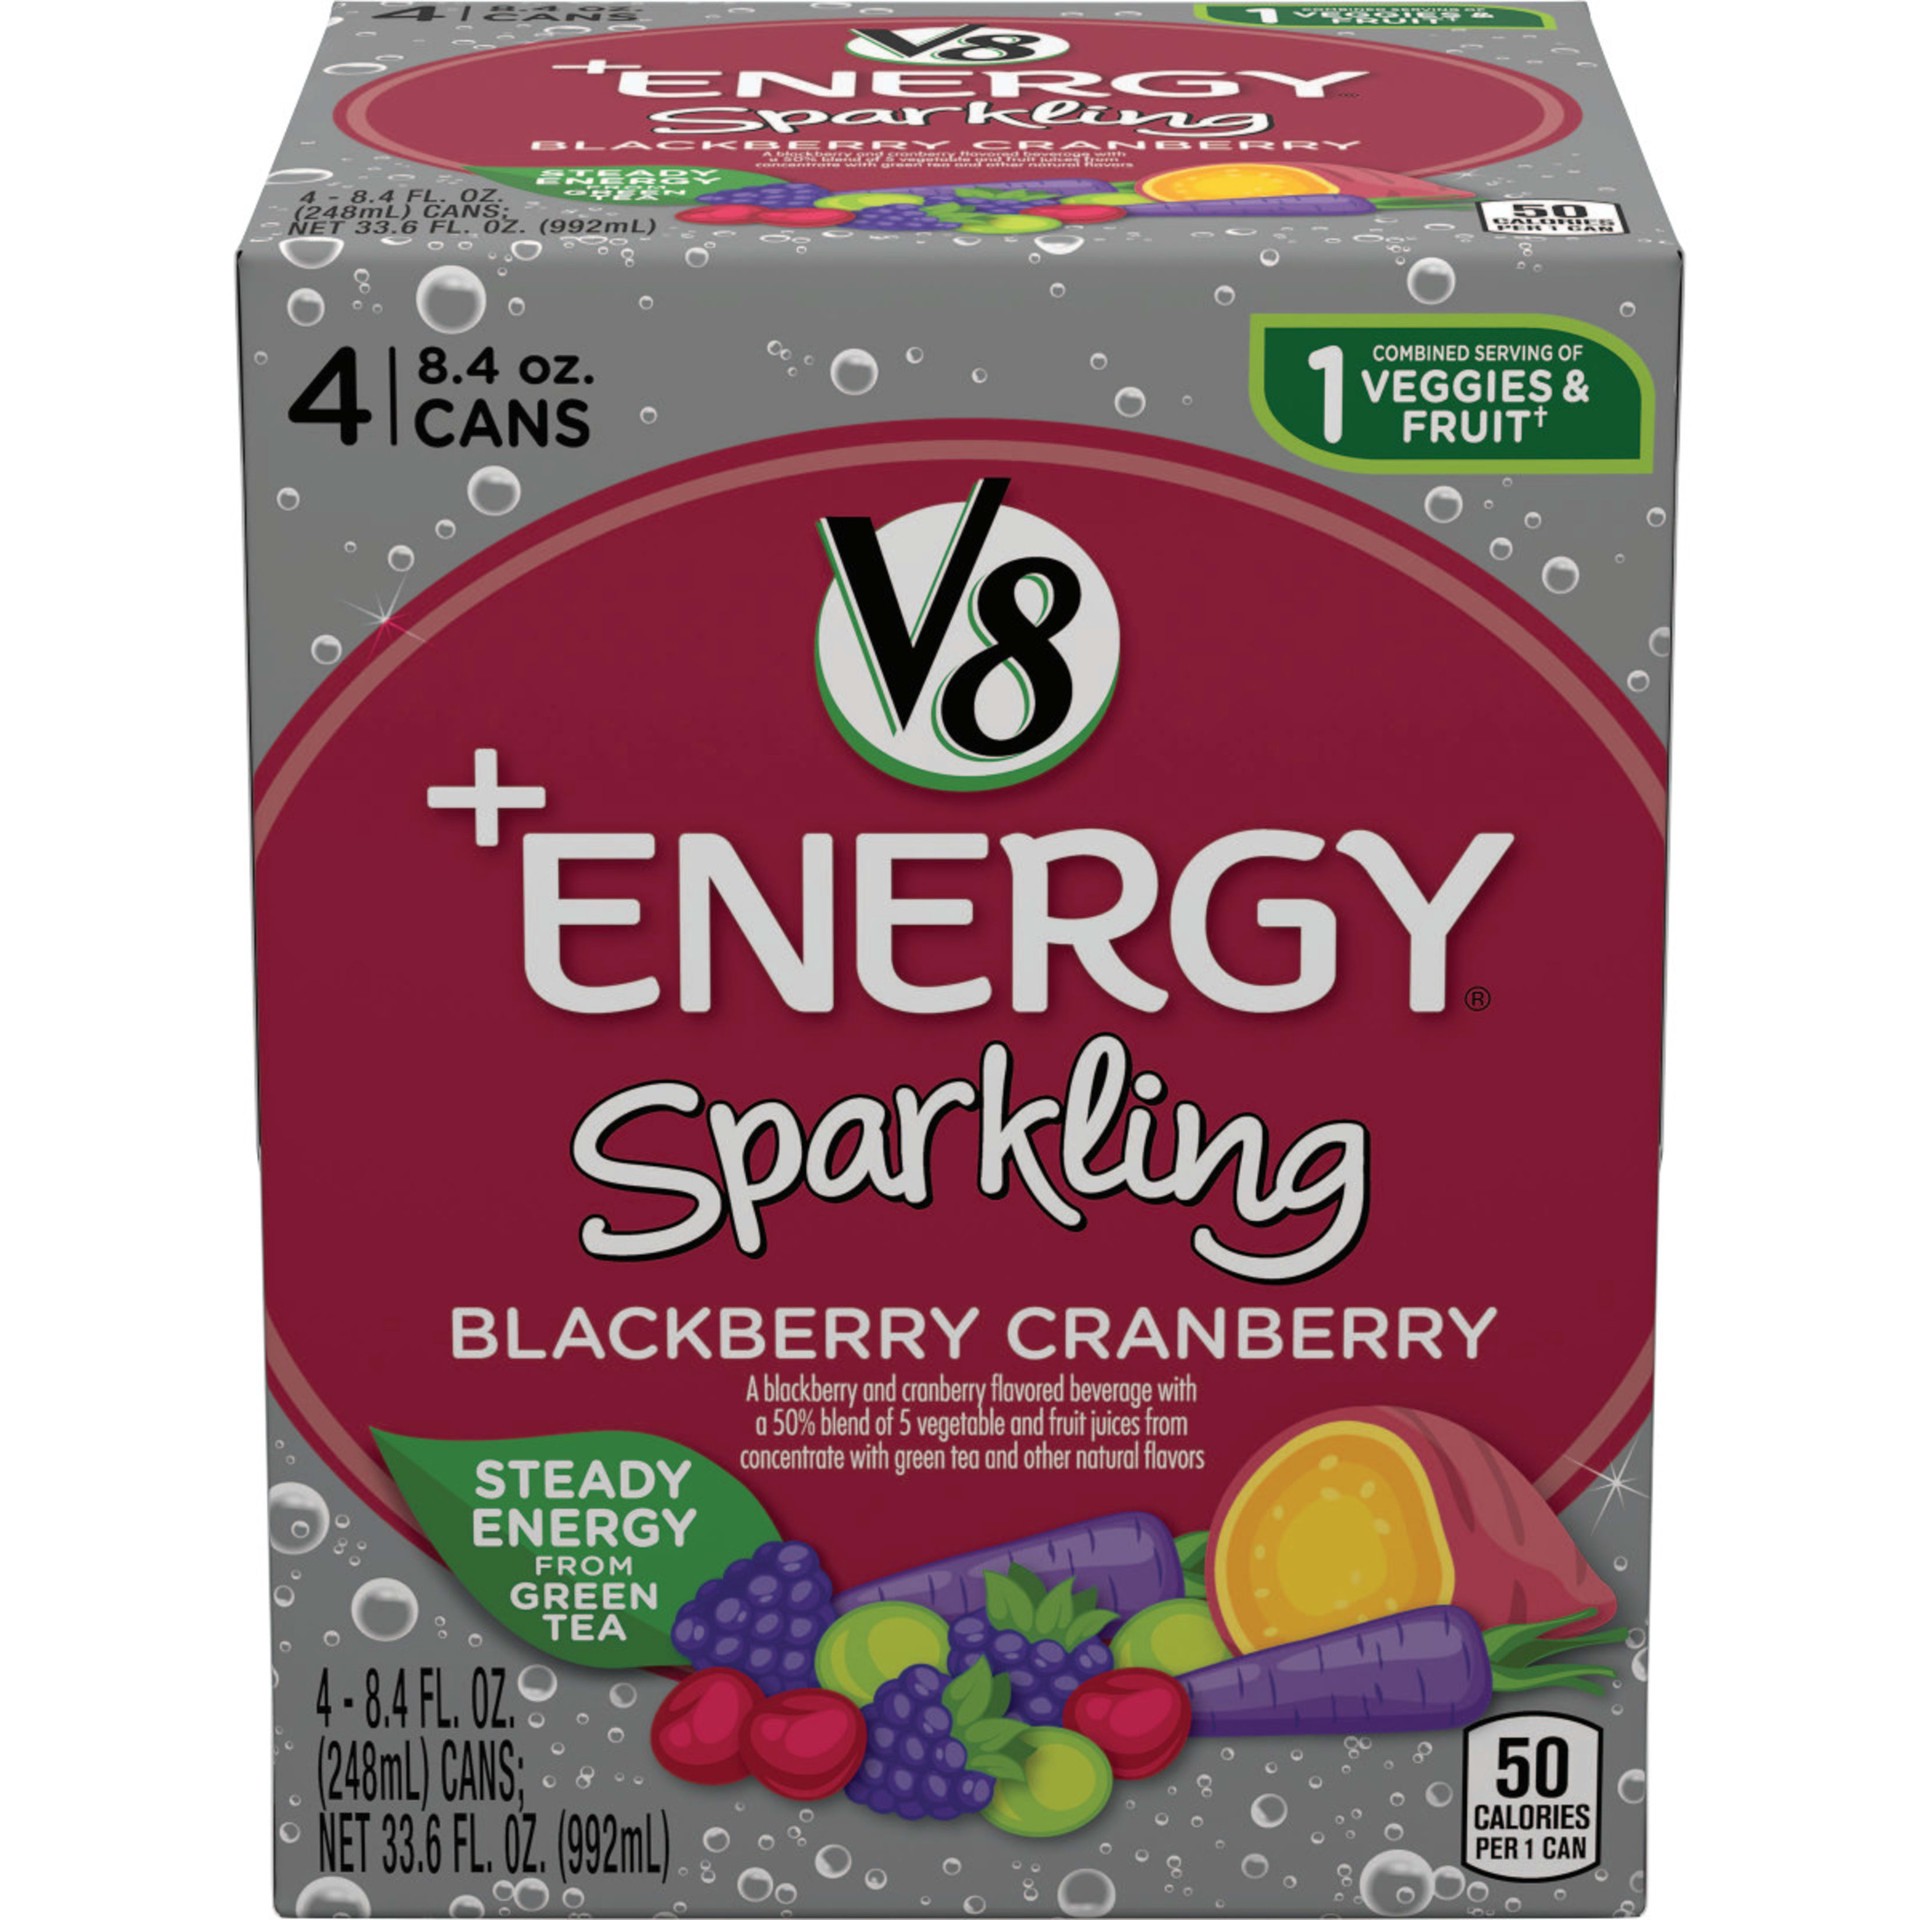 slide 1 of 5, V8 +Energy Sparkling Healthy Energy Drink, Natural Energy from Tea, Blackberry Cranberry, 8.4 Ounce Can (4 Count), 33.6 oz